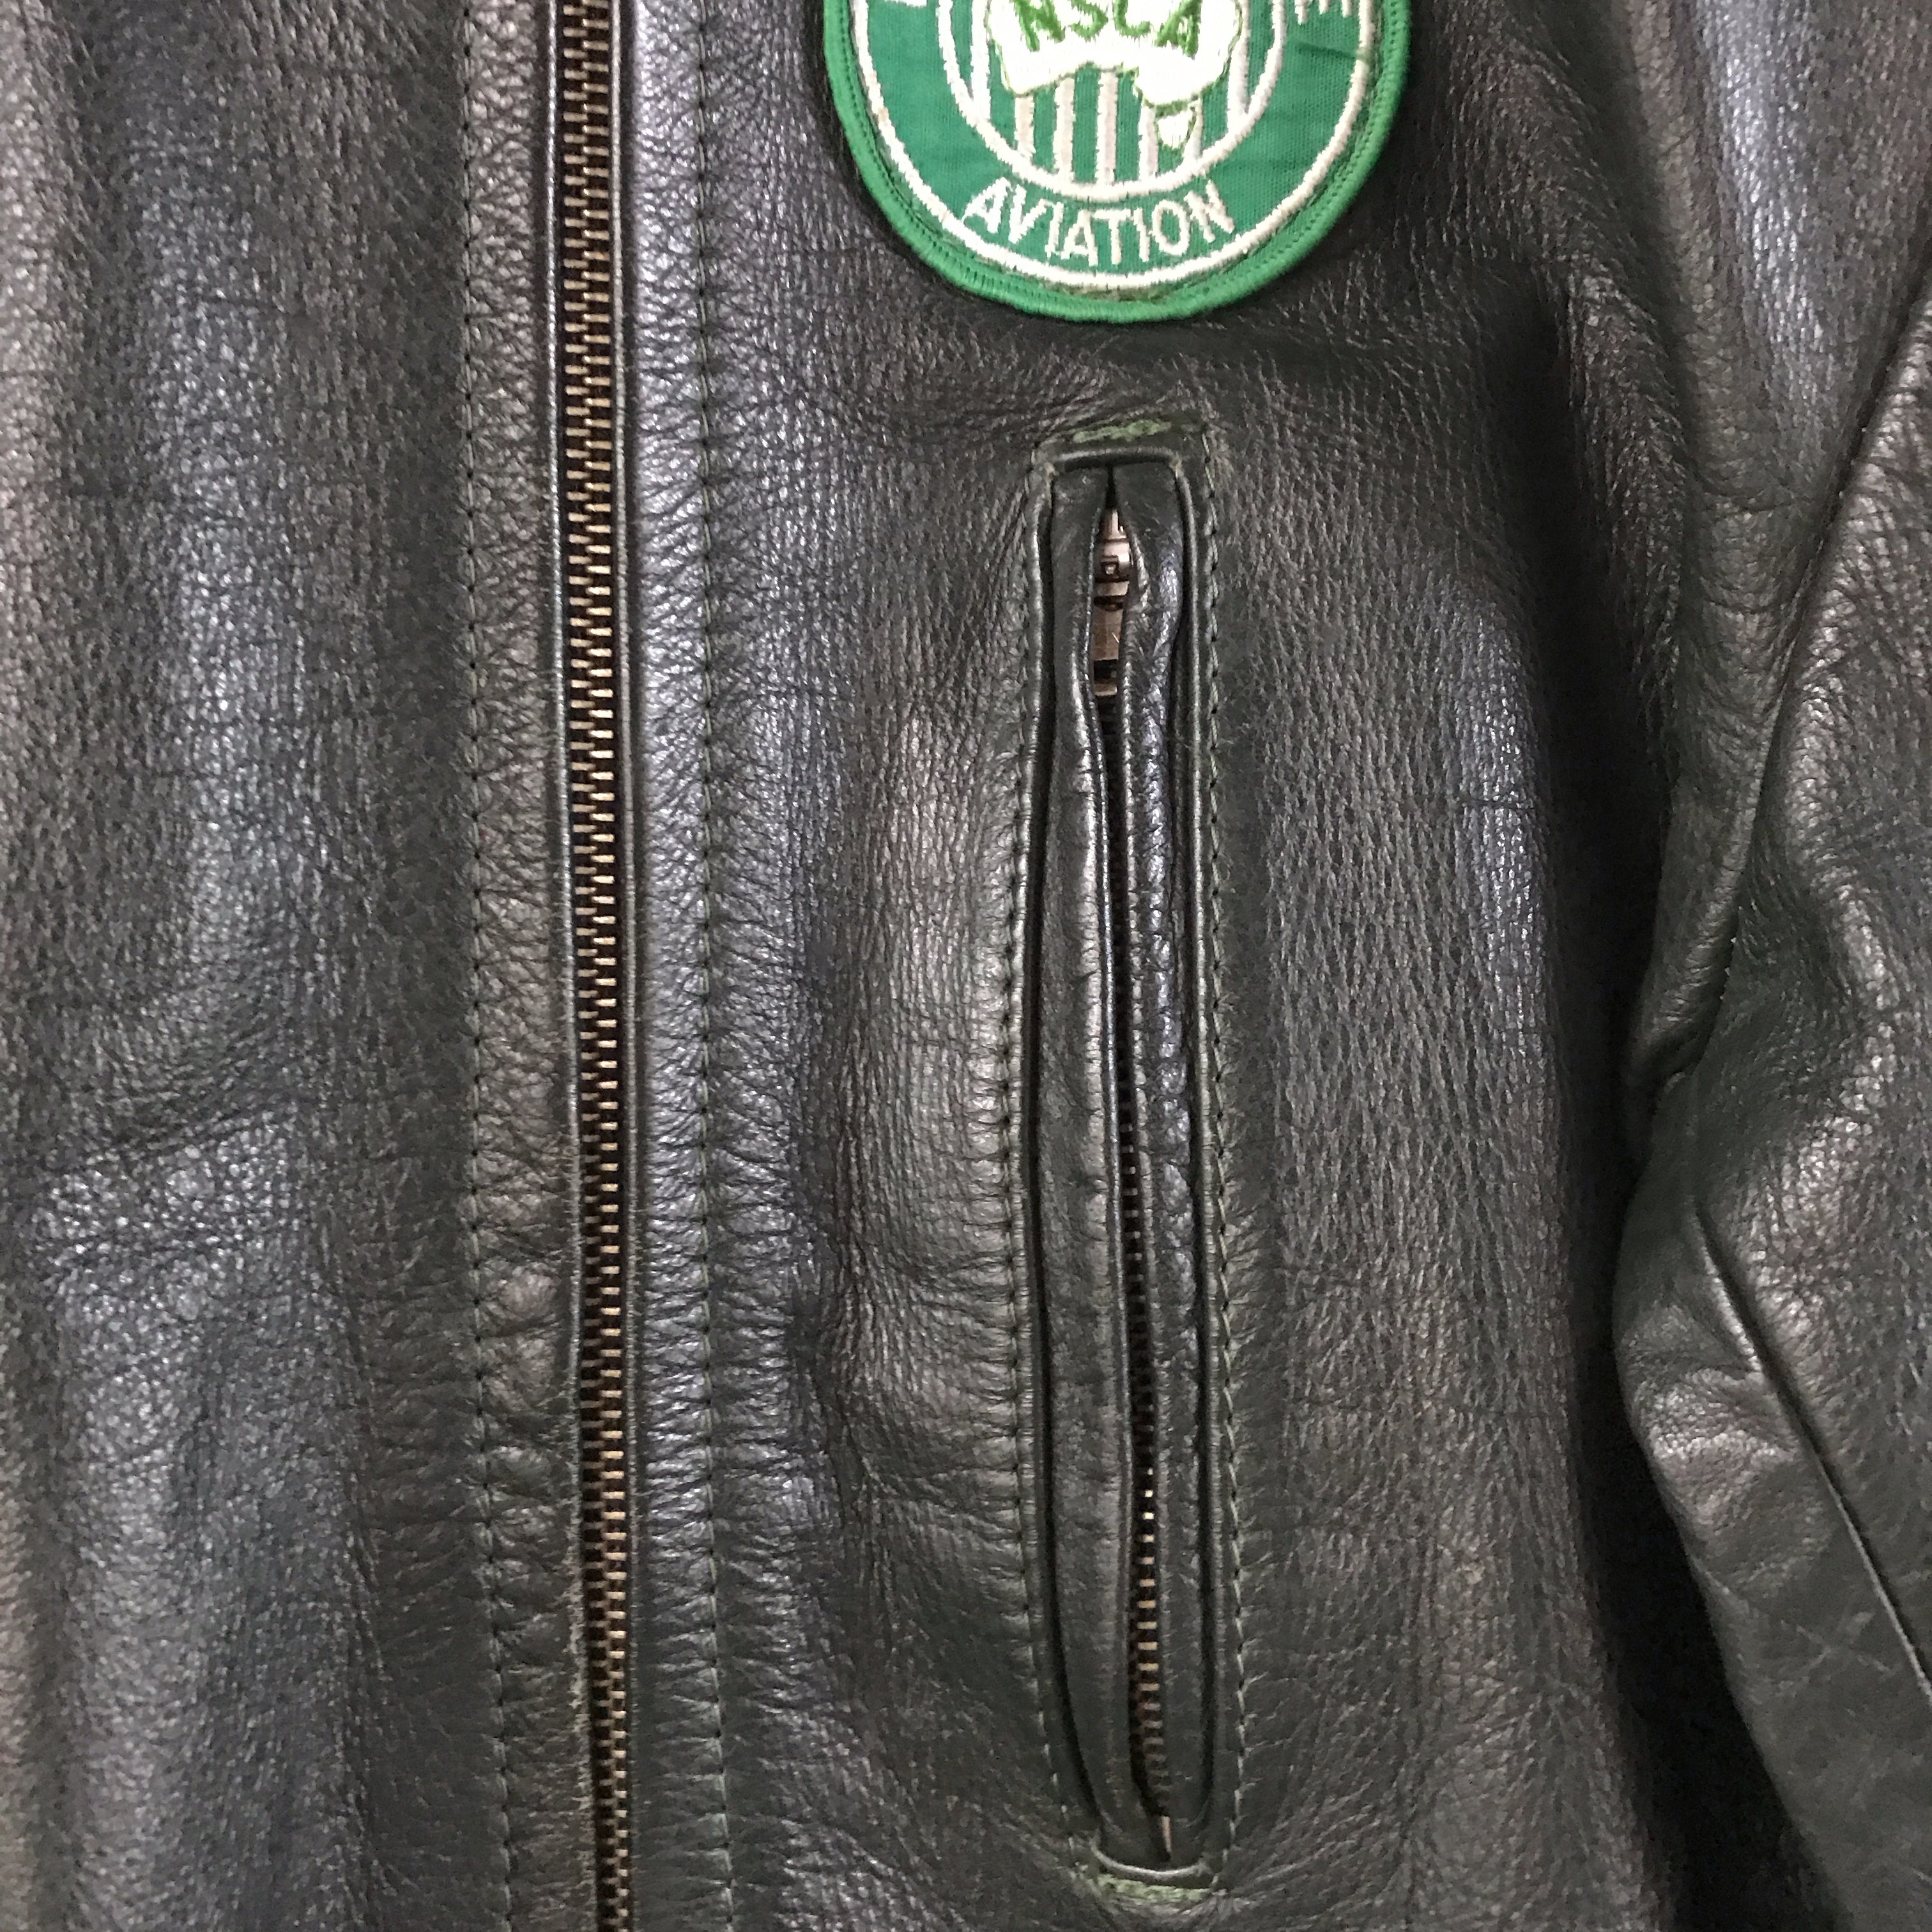 [ ONLY ONE ! ] National Safety Council of Australia　LEATHER JACKET / MARS LEATHERS